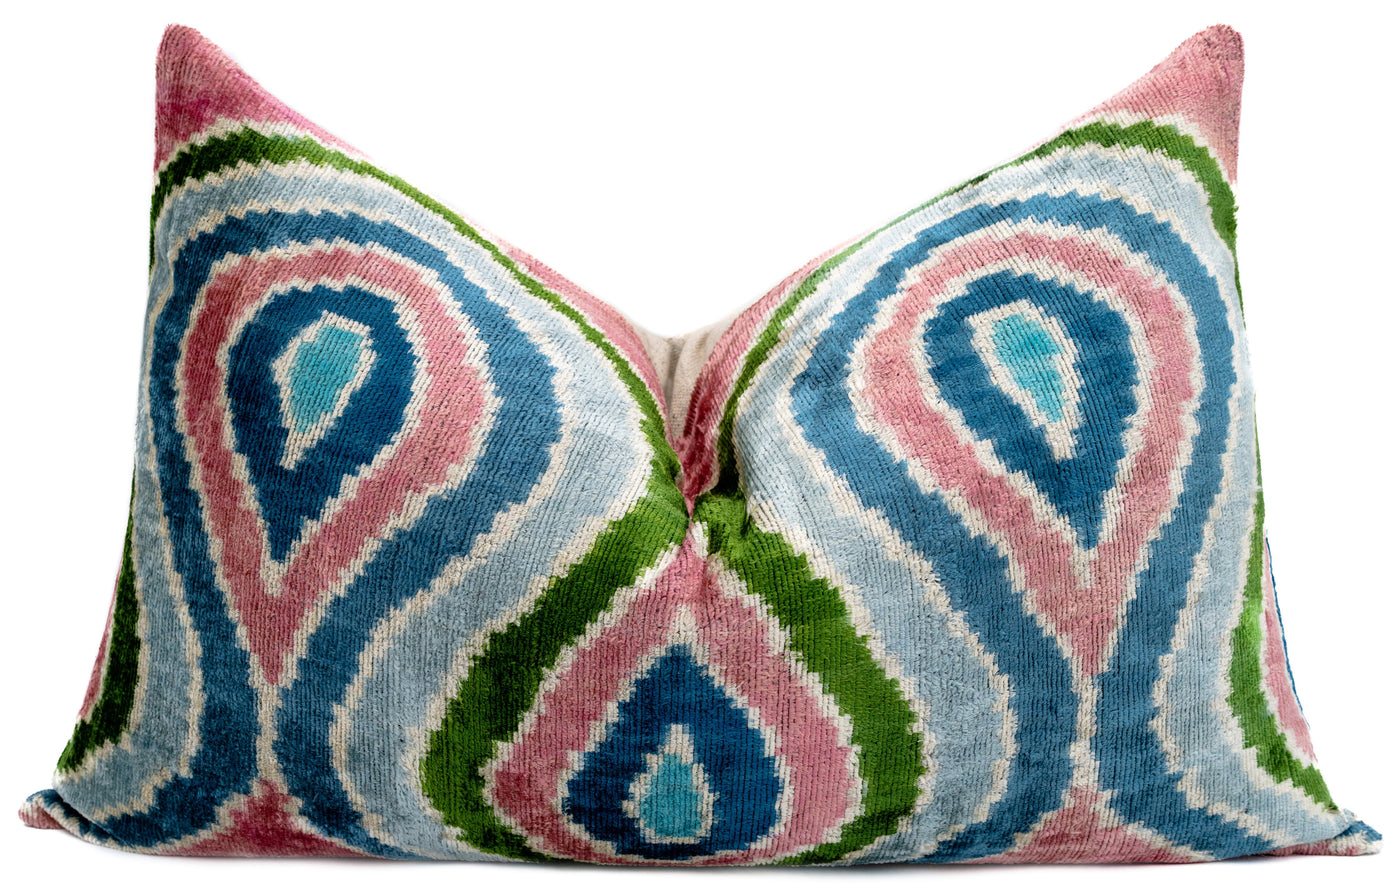 Canvello Luxurious 16x24 Inch Designer Throw Pillow with Down Feather Insert - Artistic Paisley Pattern in Vibrant Colors Pink Blue Green